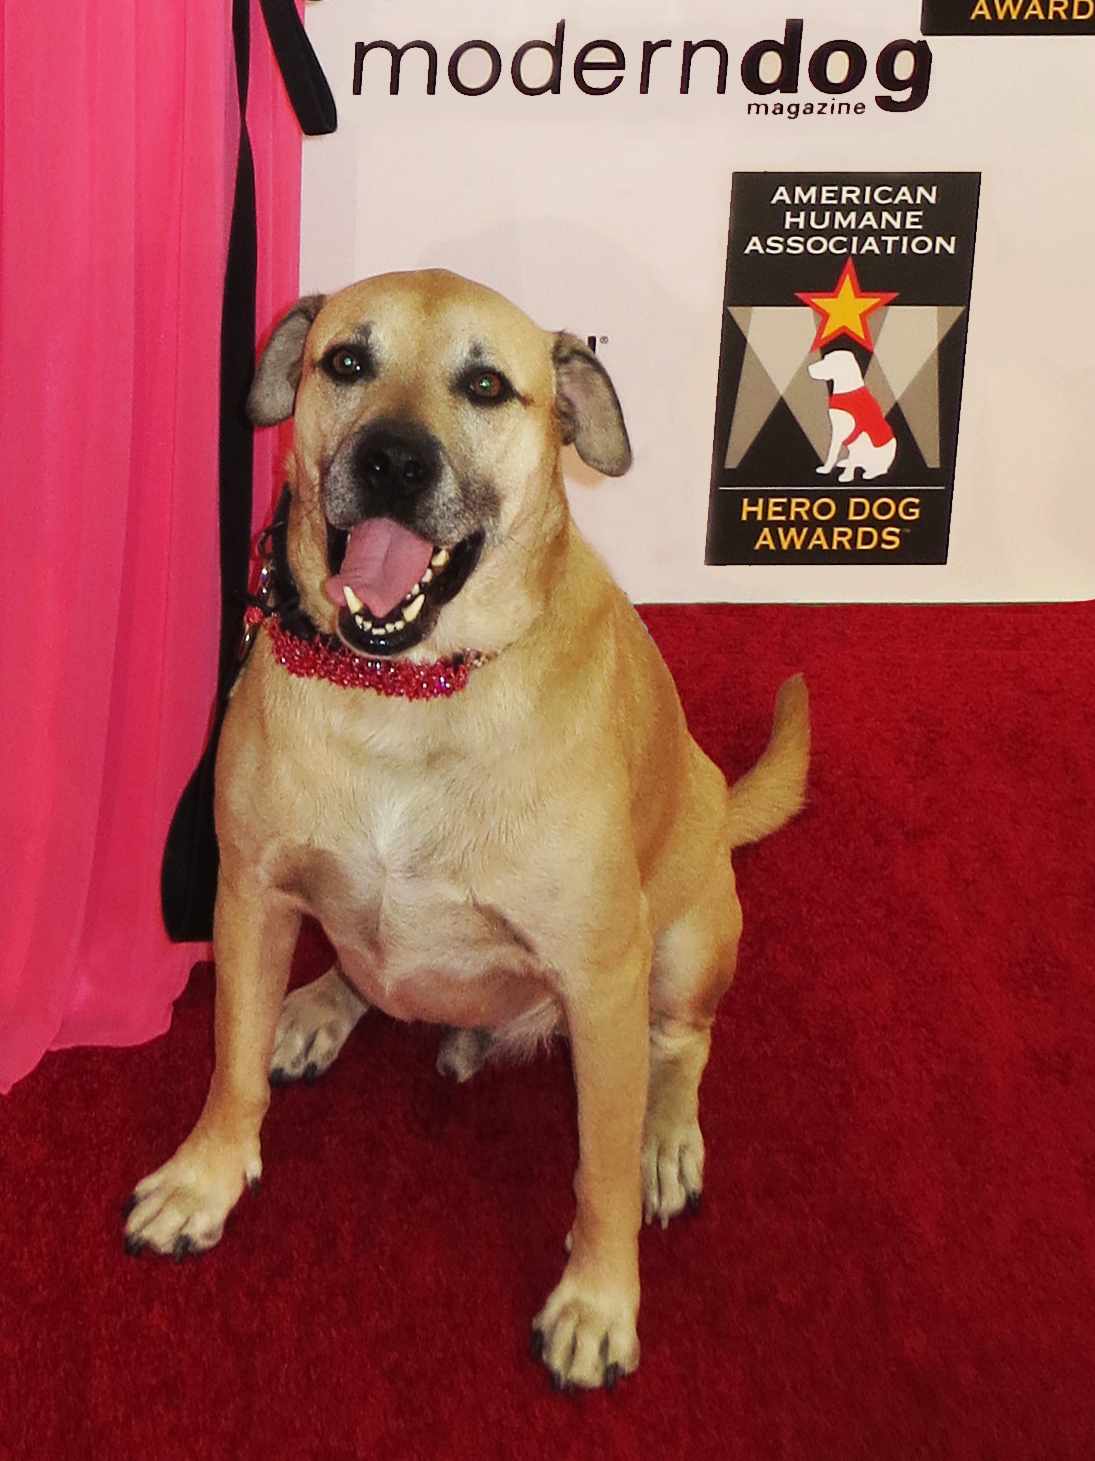 Super Smiley is the National Spokes-Dog for the American Humane Association Hero Dog Awards. Pictured here at the 2013 Hero Dog Awards in Beverly Hills.